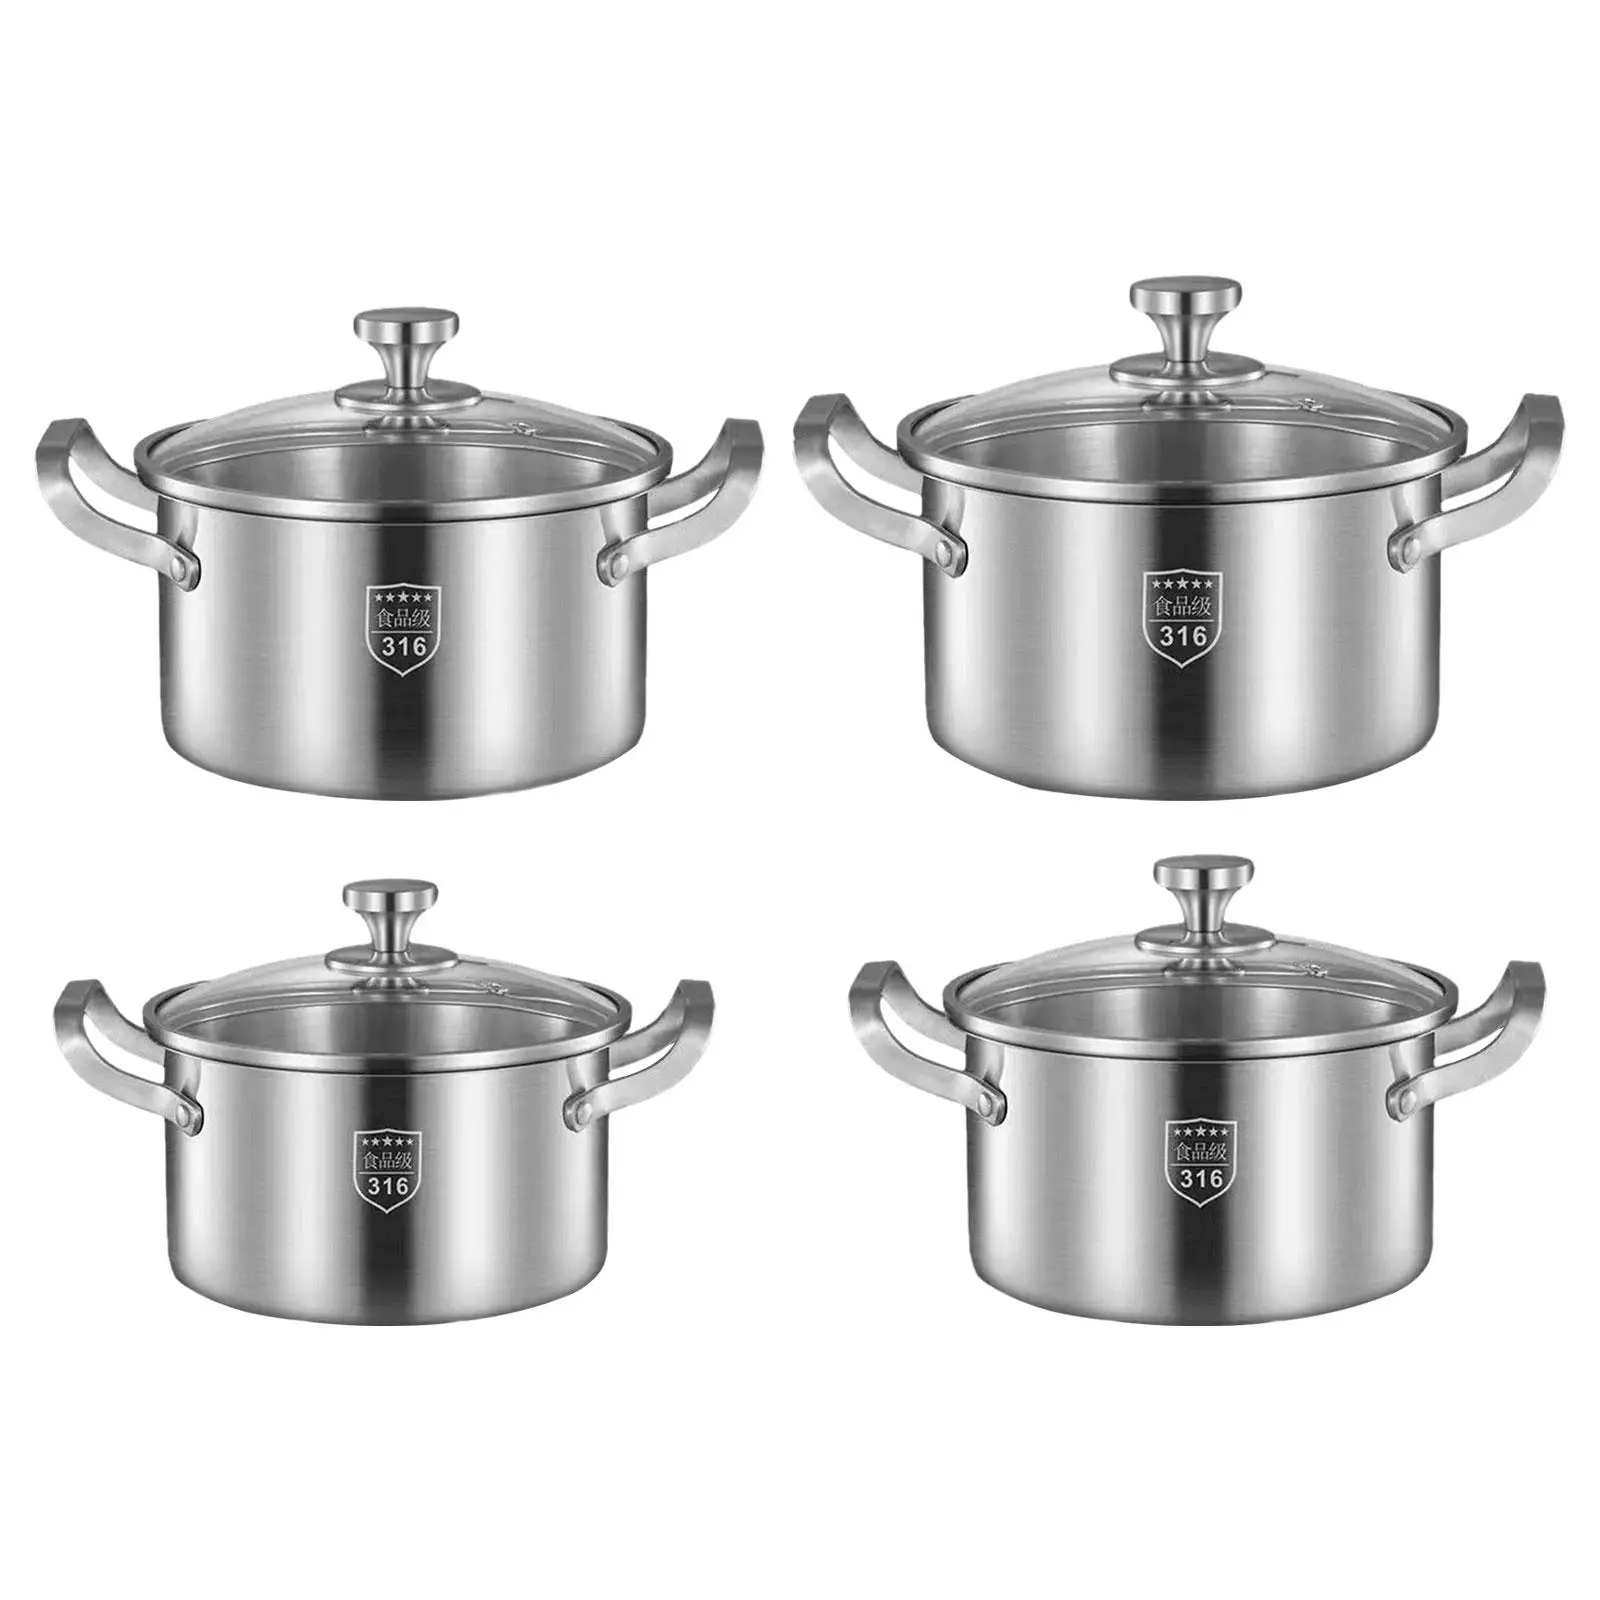 Soup Pot Cooking Tools Ergonomic Handle Works Stainless Steel Stockpot with Lid Kitchen Pot for Home Kitchen Bar Restaurant